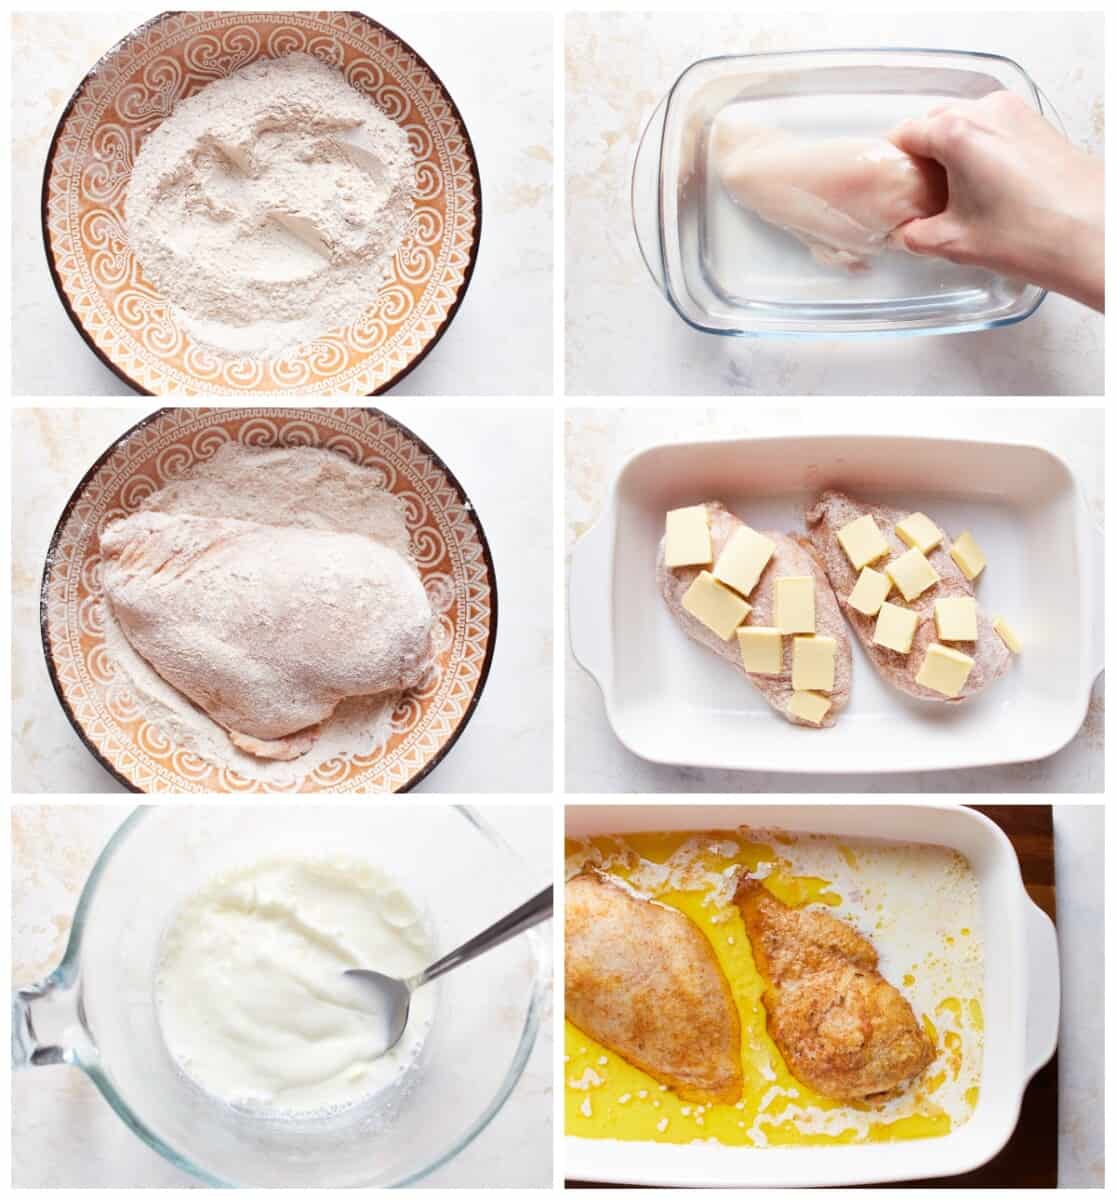 how to make butter baked chicken step by step photos